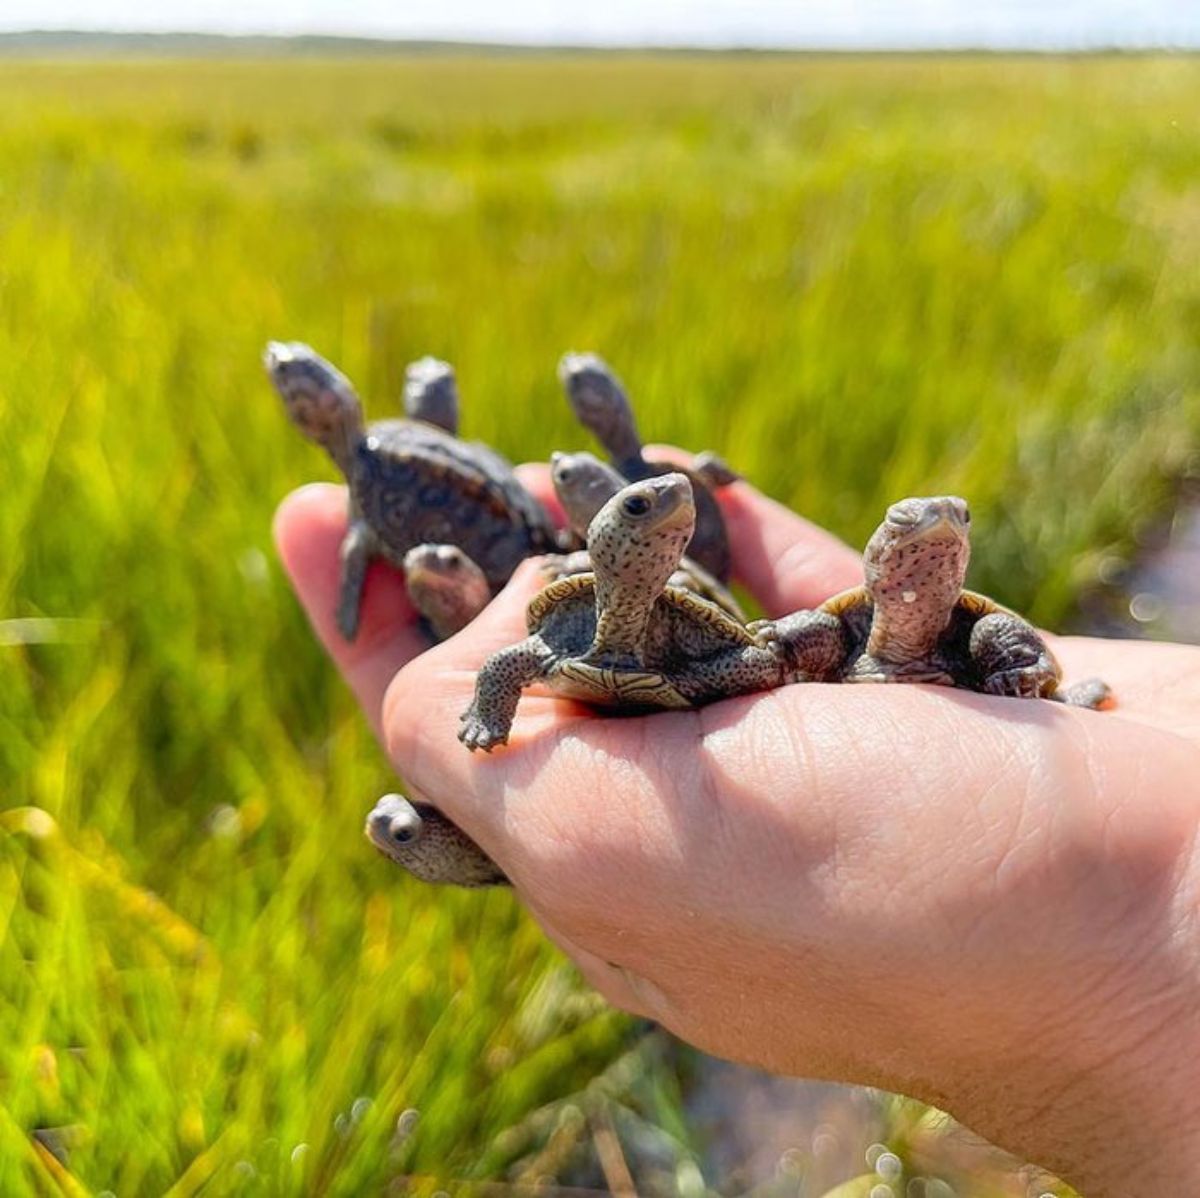 a few turtles being held in someone's hands in front of a field